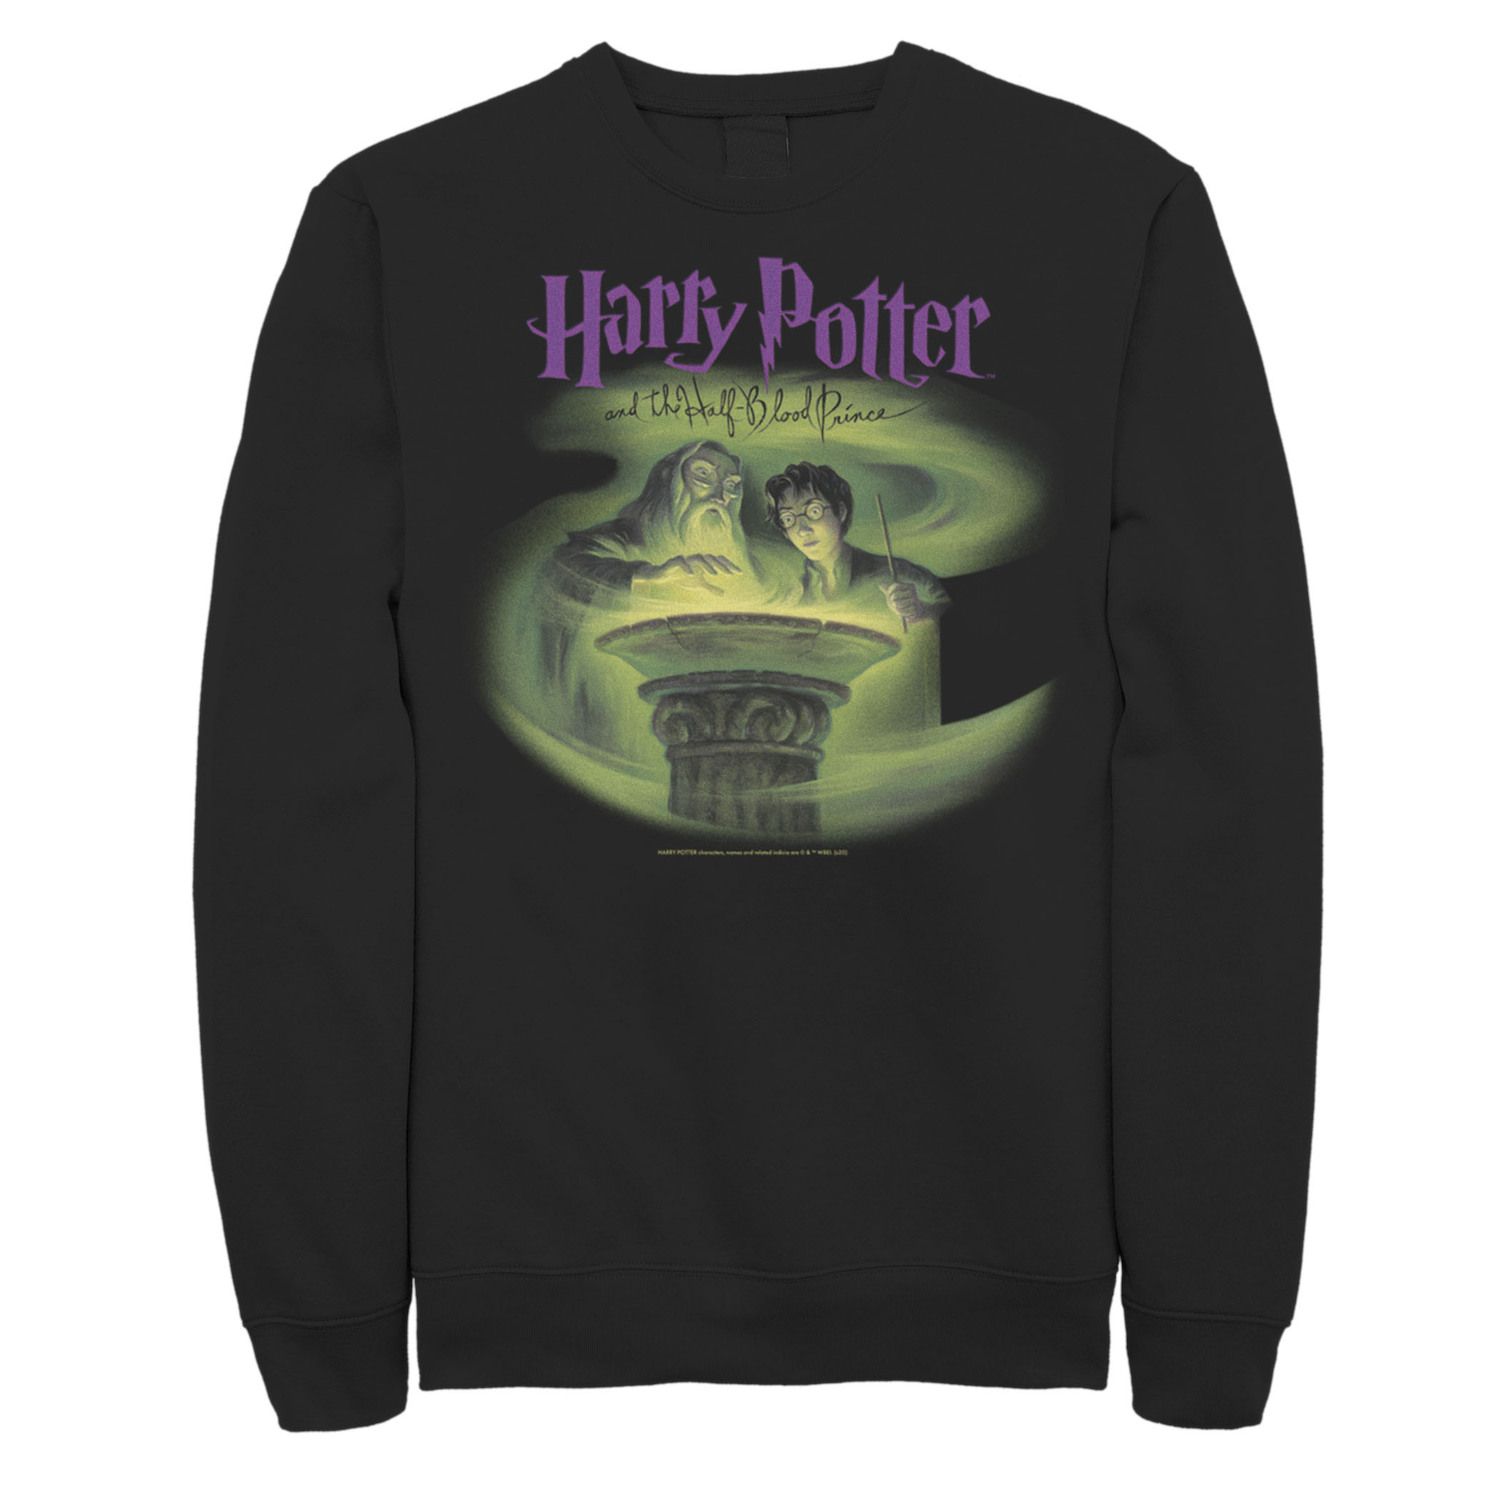 Image for Harry Potter Men's Prince Cover Poster Sweatshirt at Kohl's.